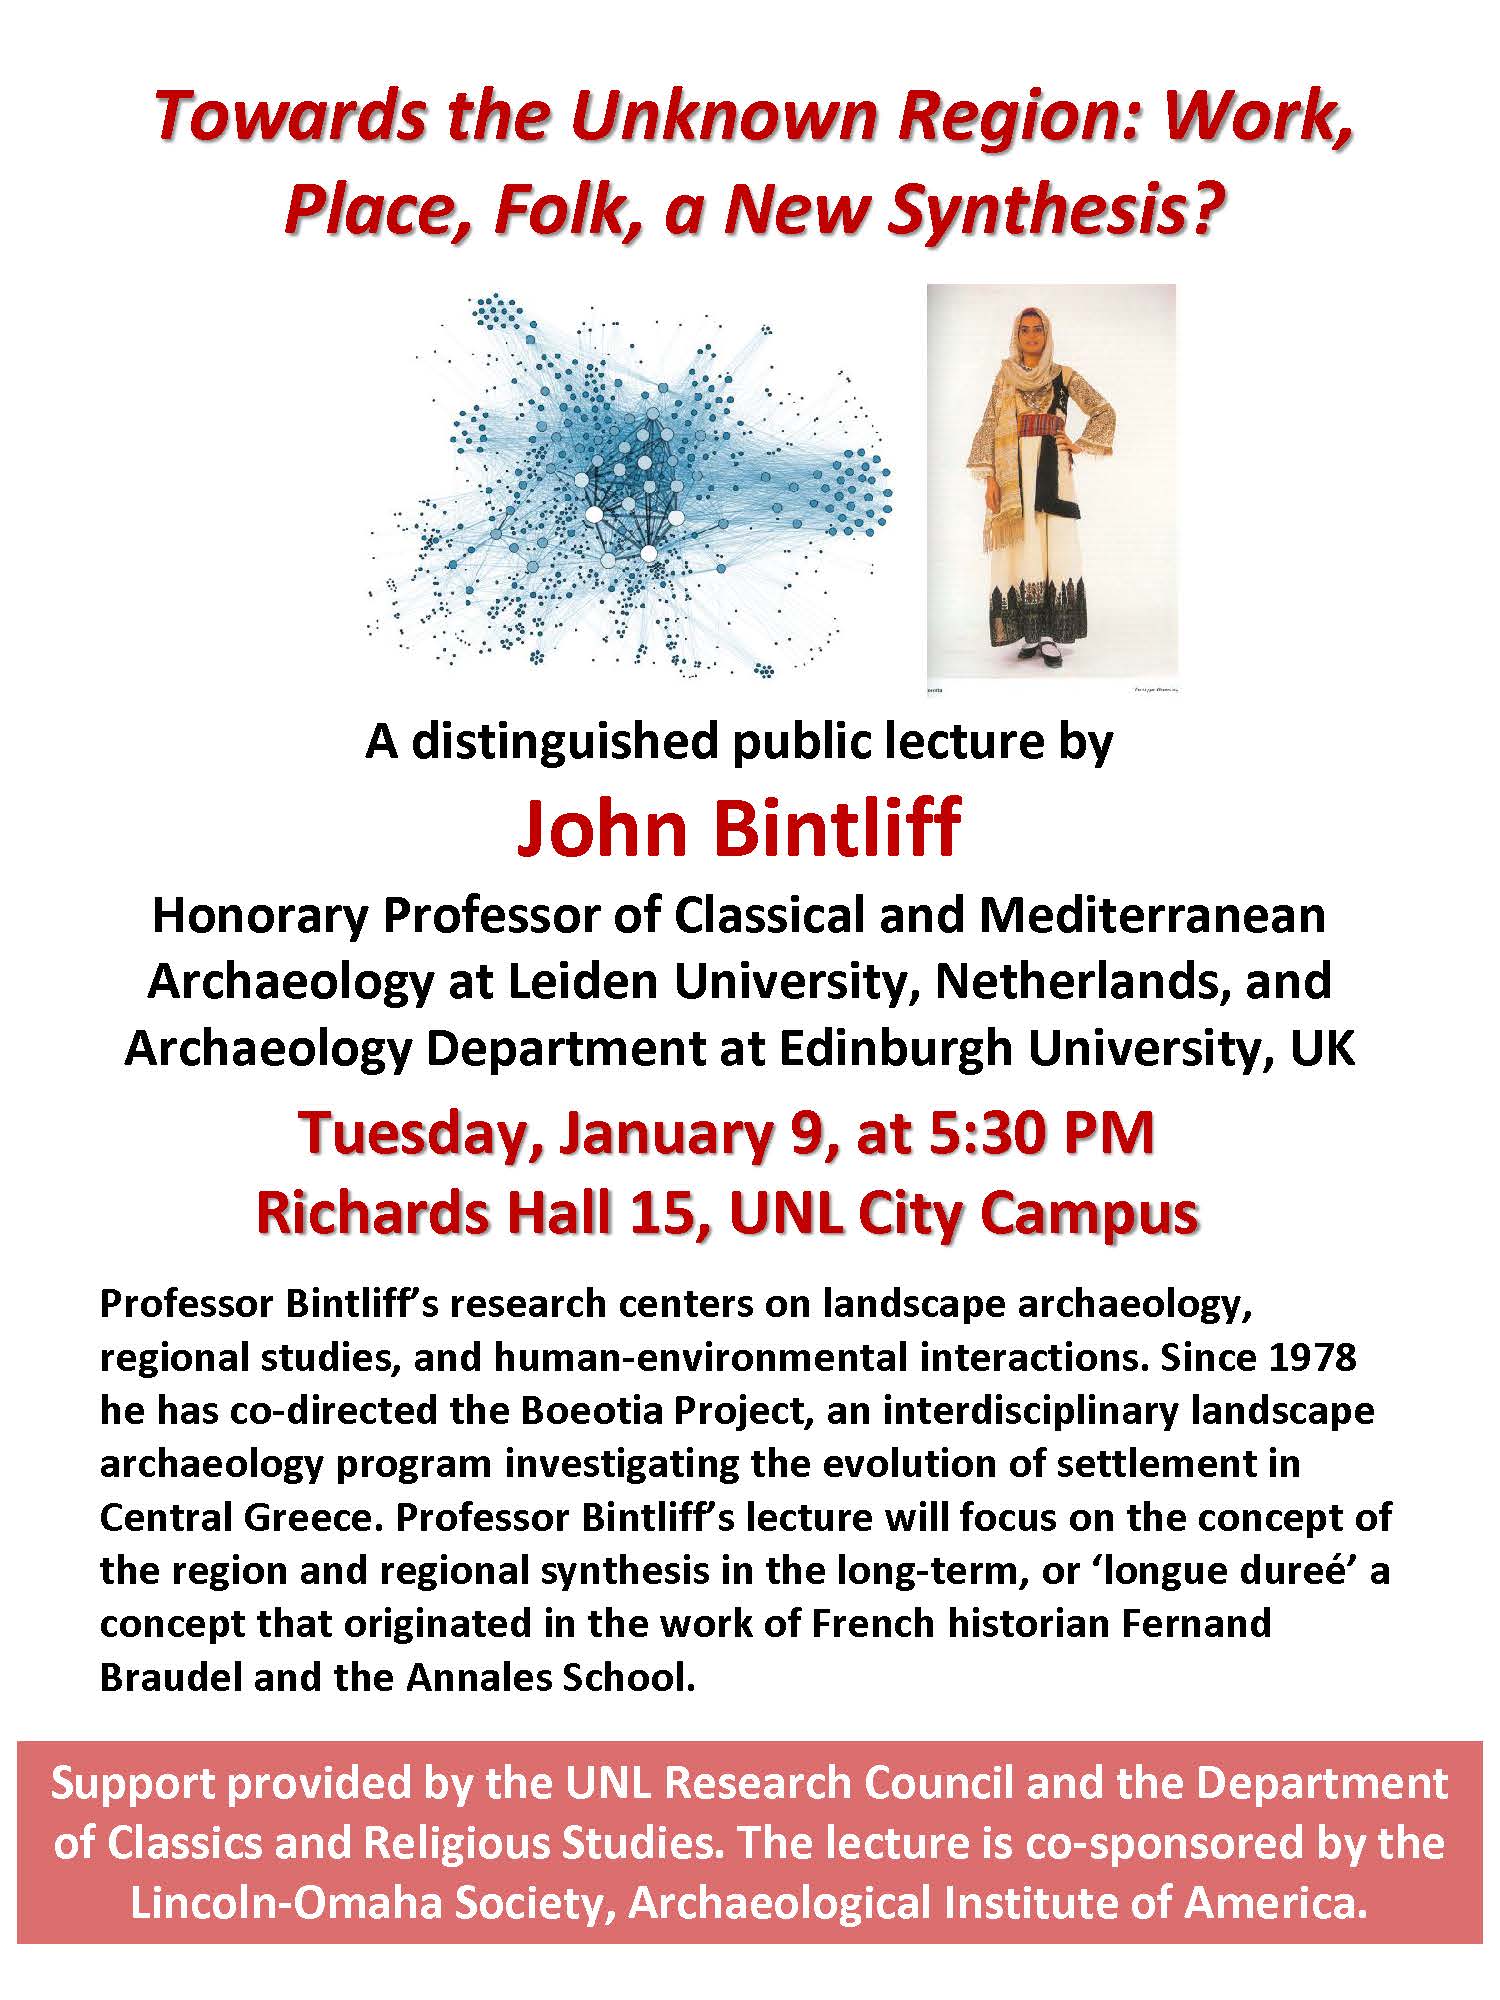 John Bintliff Lectures on January 8th and 9th 